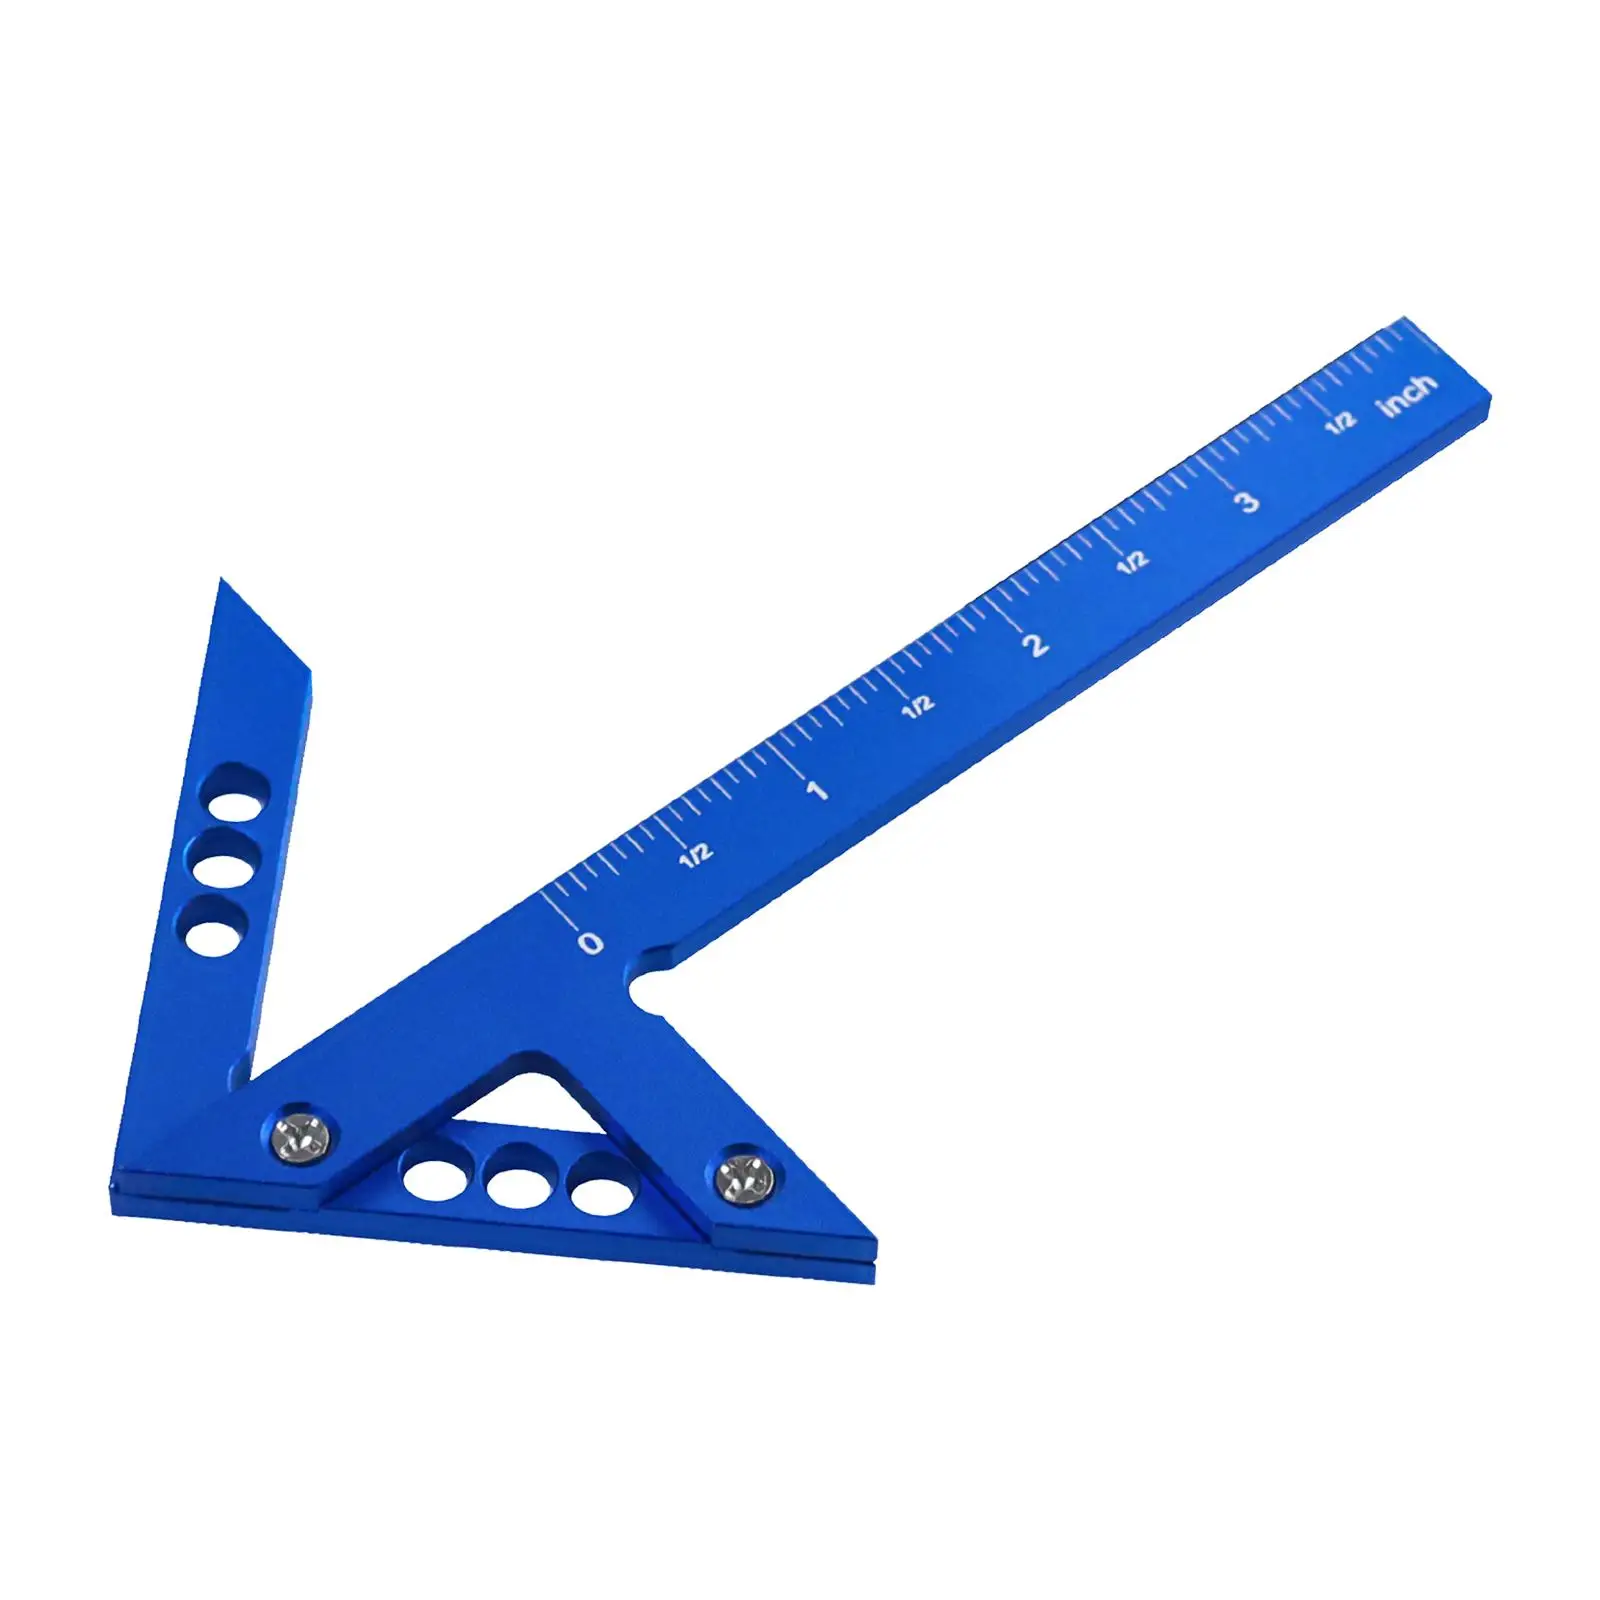 Center Measuring Tool Woodworking Angle Ruler Square Protractor Aluminum Alloy Circle Center Finder Tool for Drawing Engineer